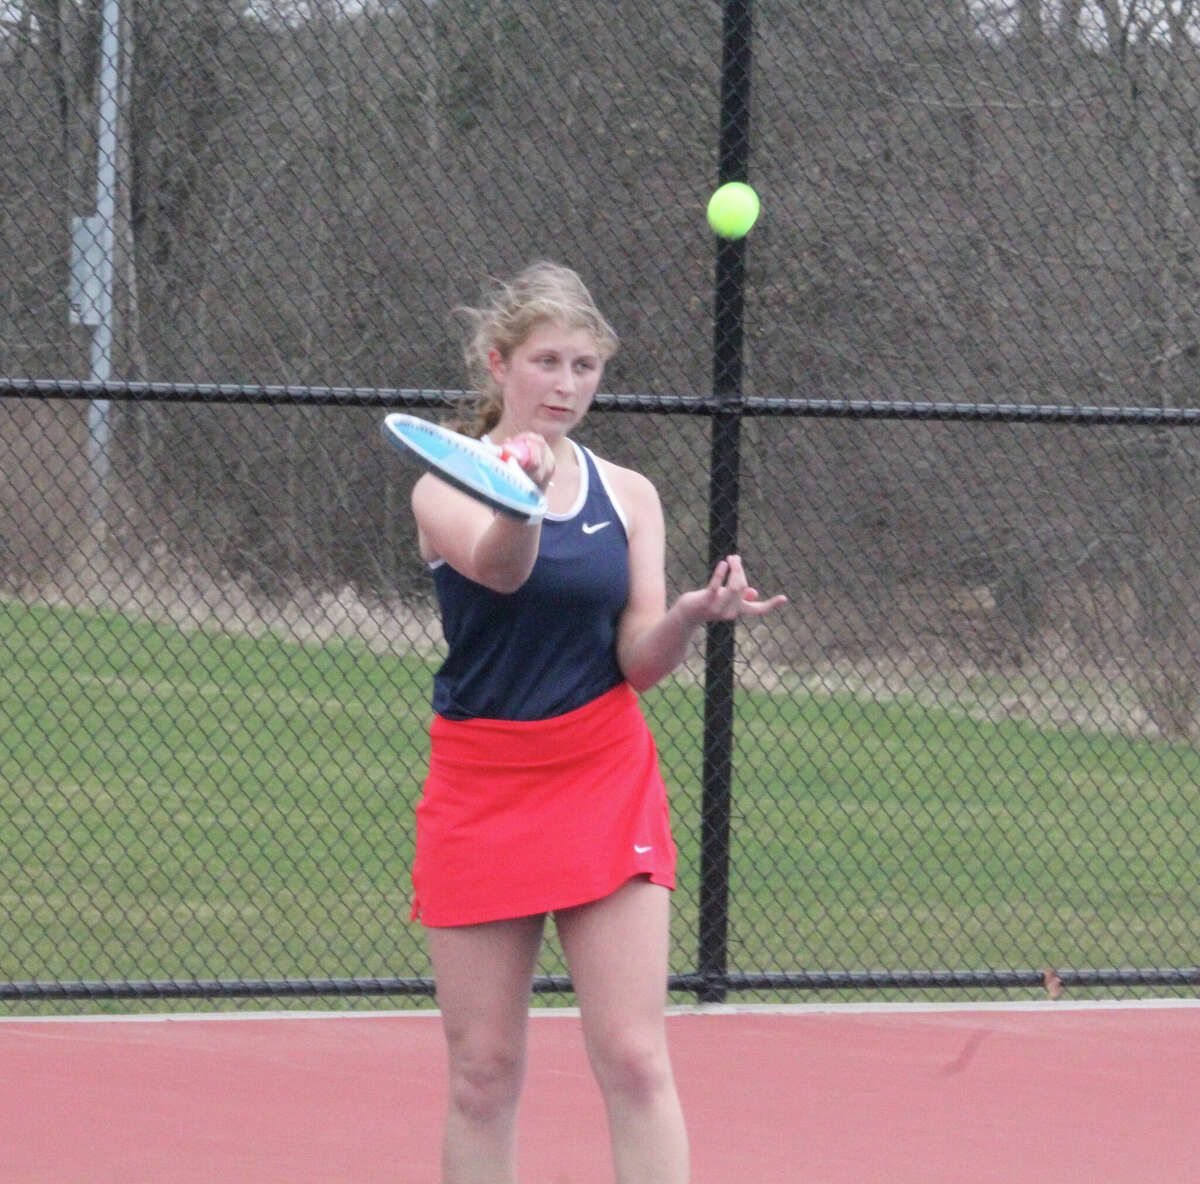 Addison Mossel plays the ball at No. 1 singles for Big Rapids' tennis team.